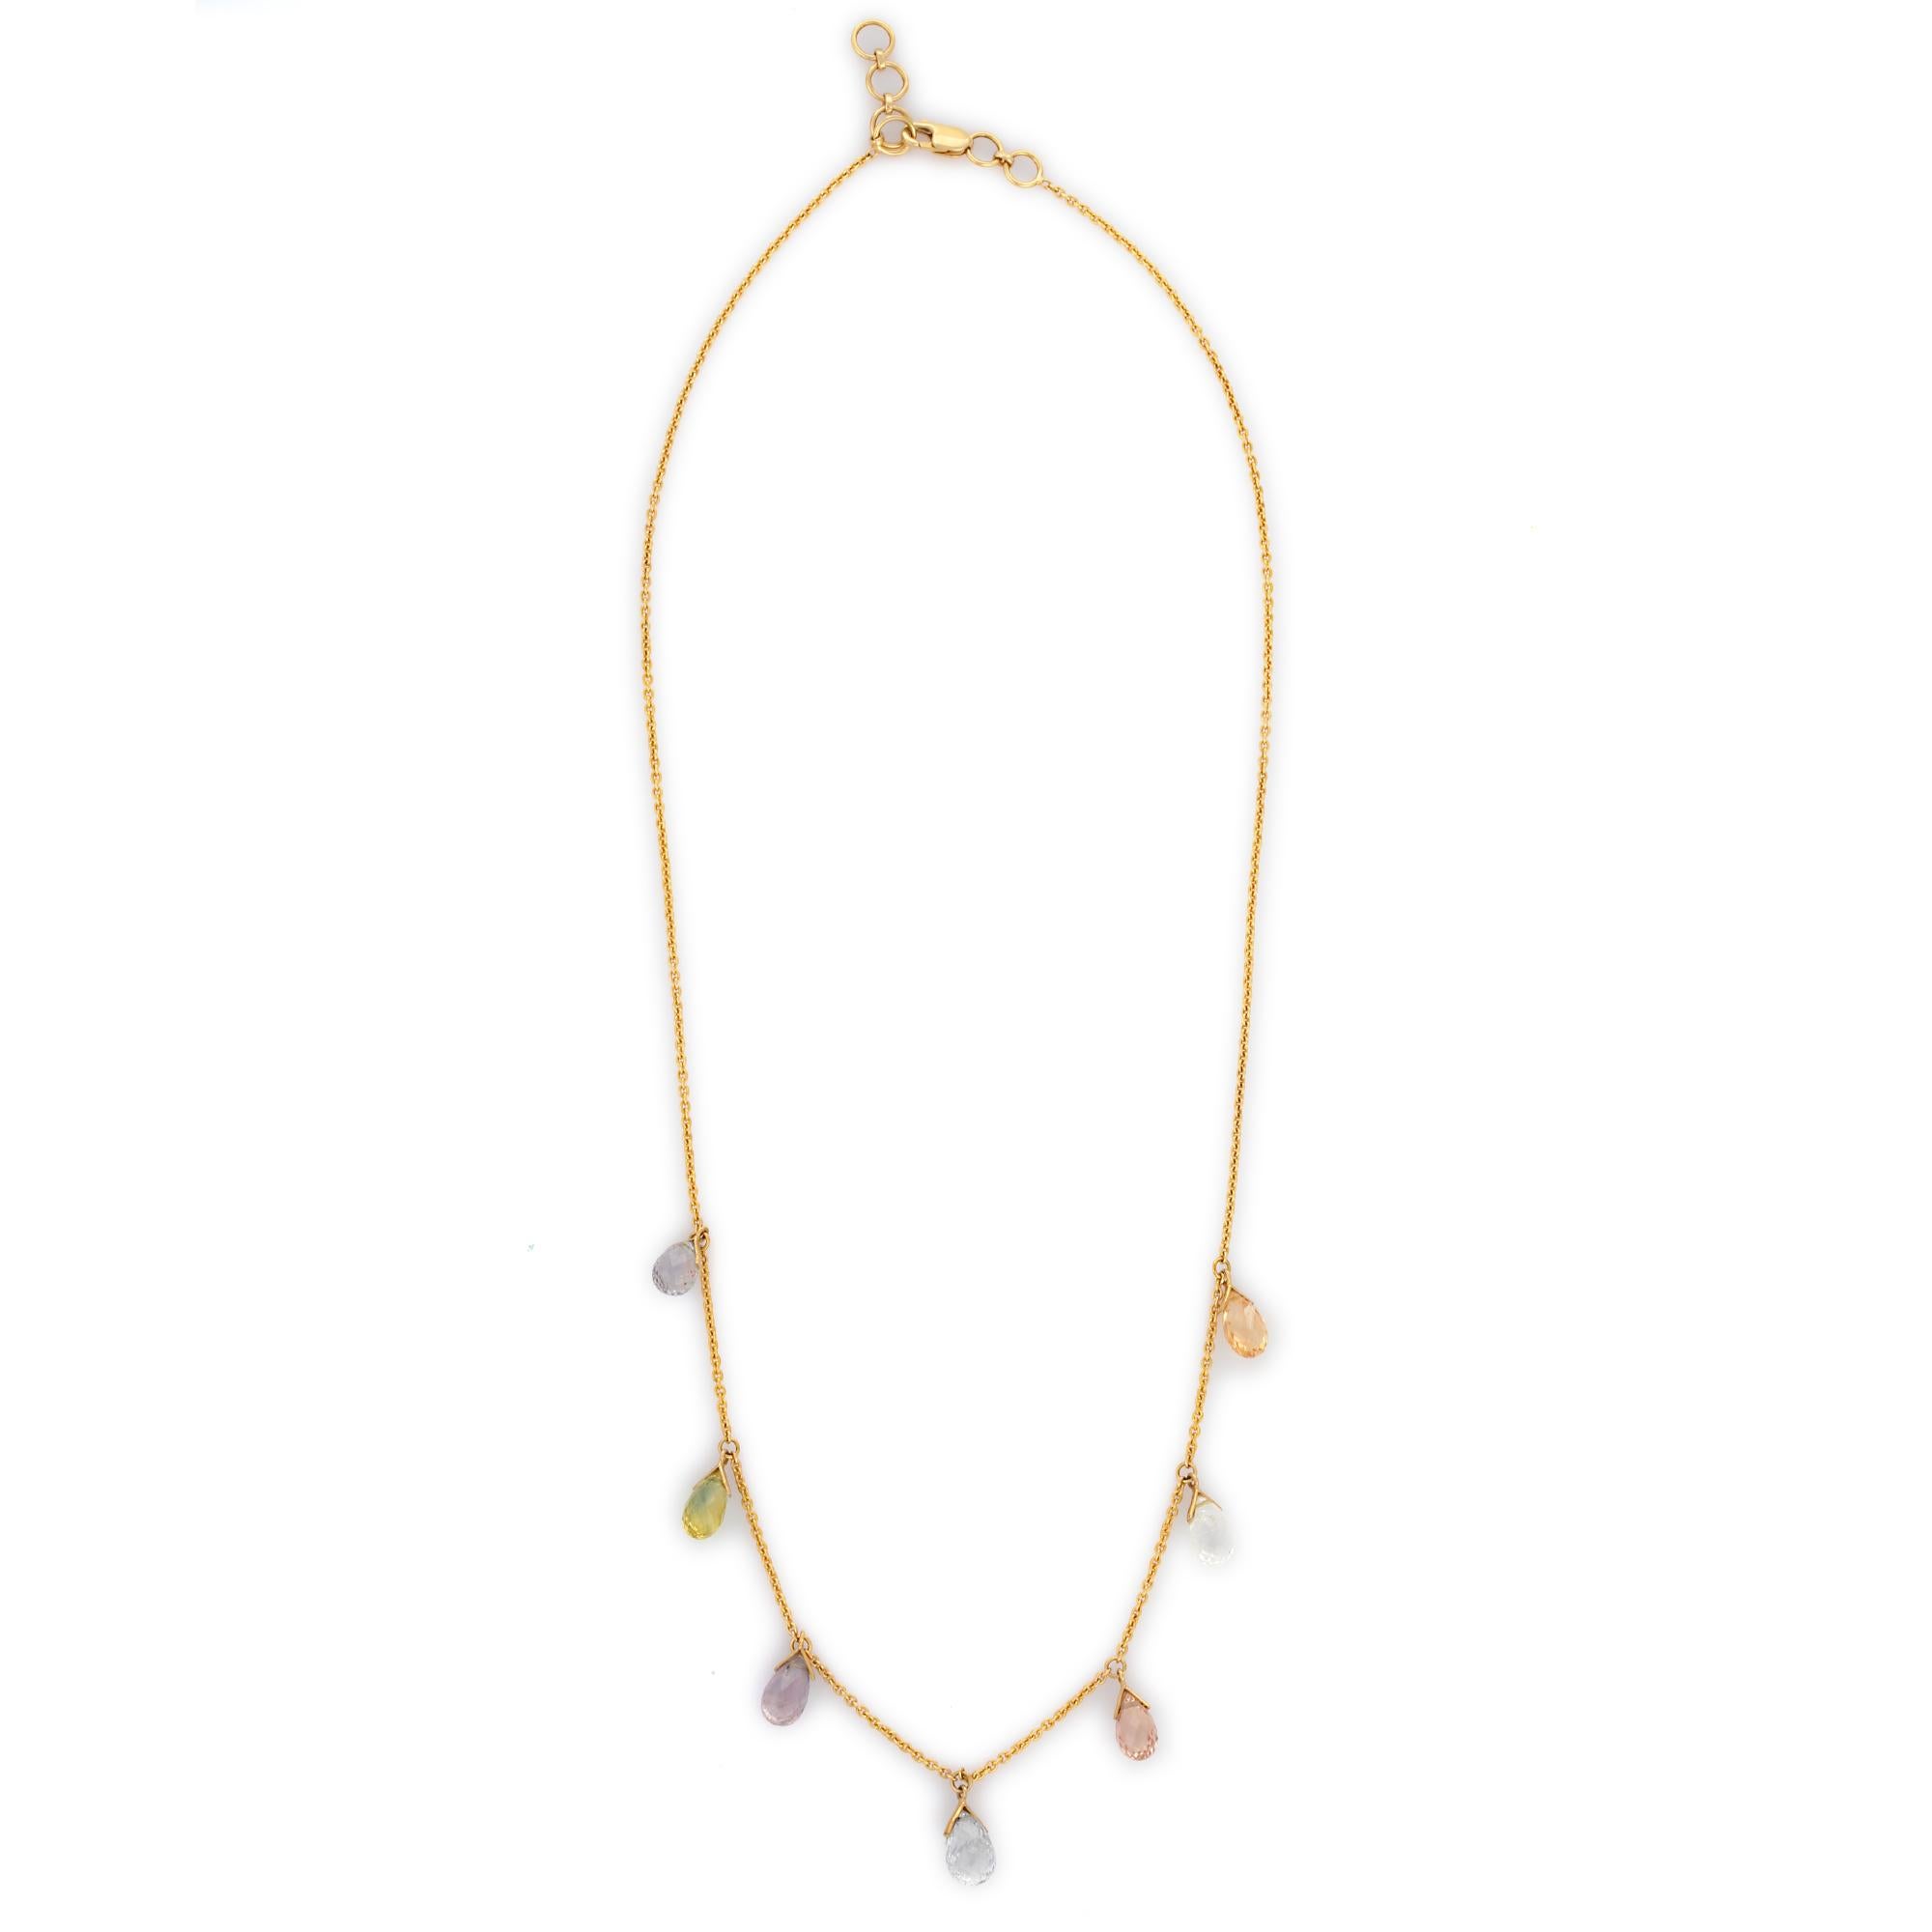 Multi Sapphire Chain Necklace Enhancer in 18K Gold studded with drop cut multi sapphire gemstones.
Accessorize your look with this elegant multi sapphire drop necklace. This stunning piece of jewelry instantly elevates a casual look or dressy